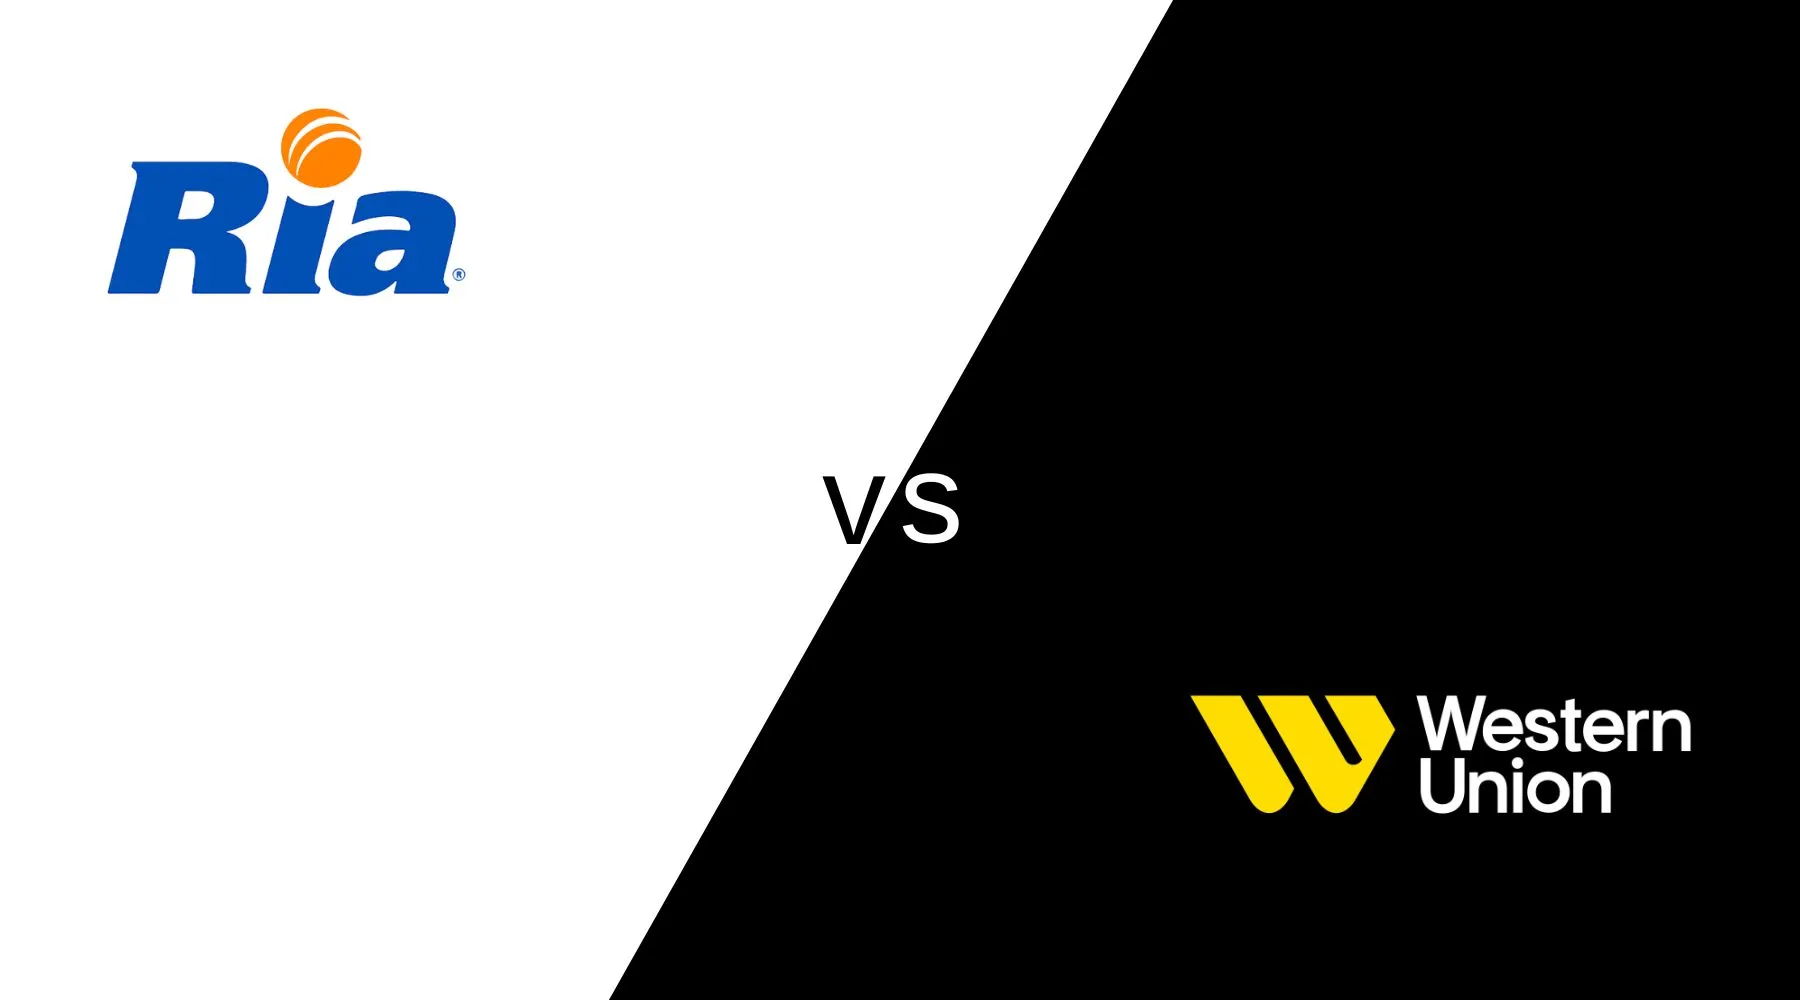 Is Ria better than Western Union?